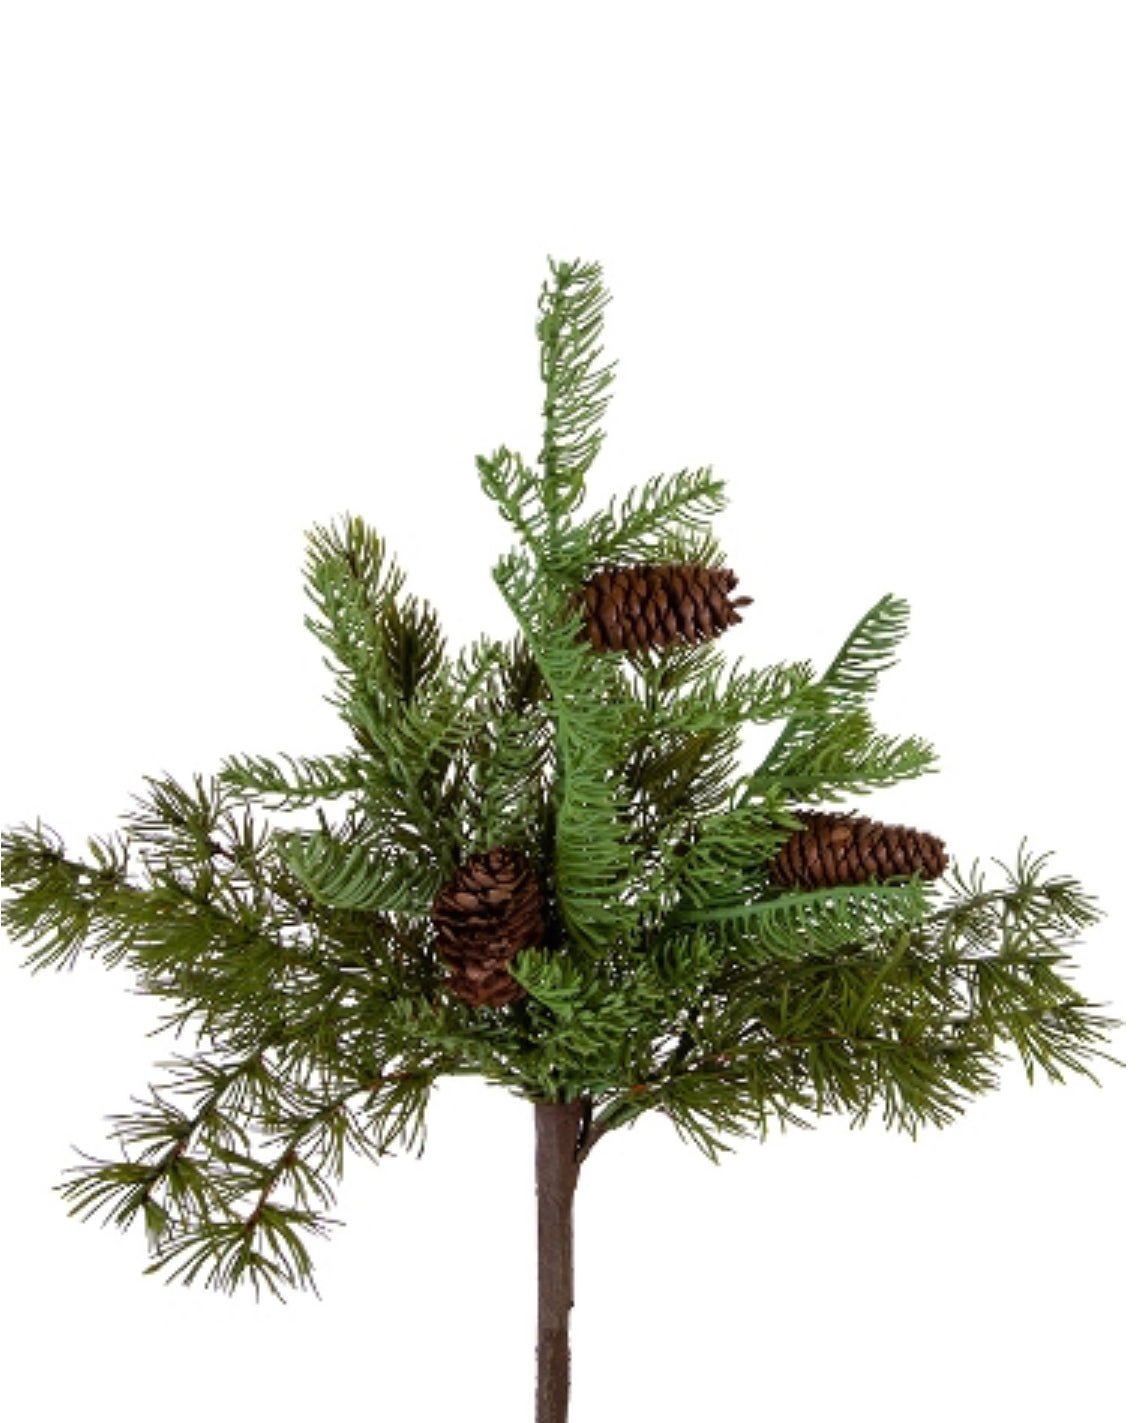 Artificial mixed spruce pine bush - Greenery MarketWinter and Christmas2833394VG